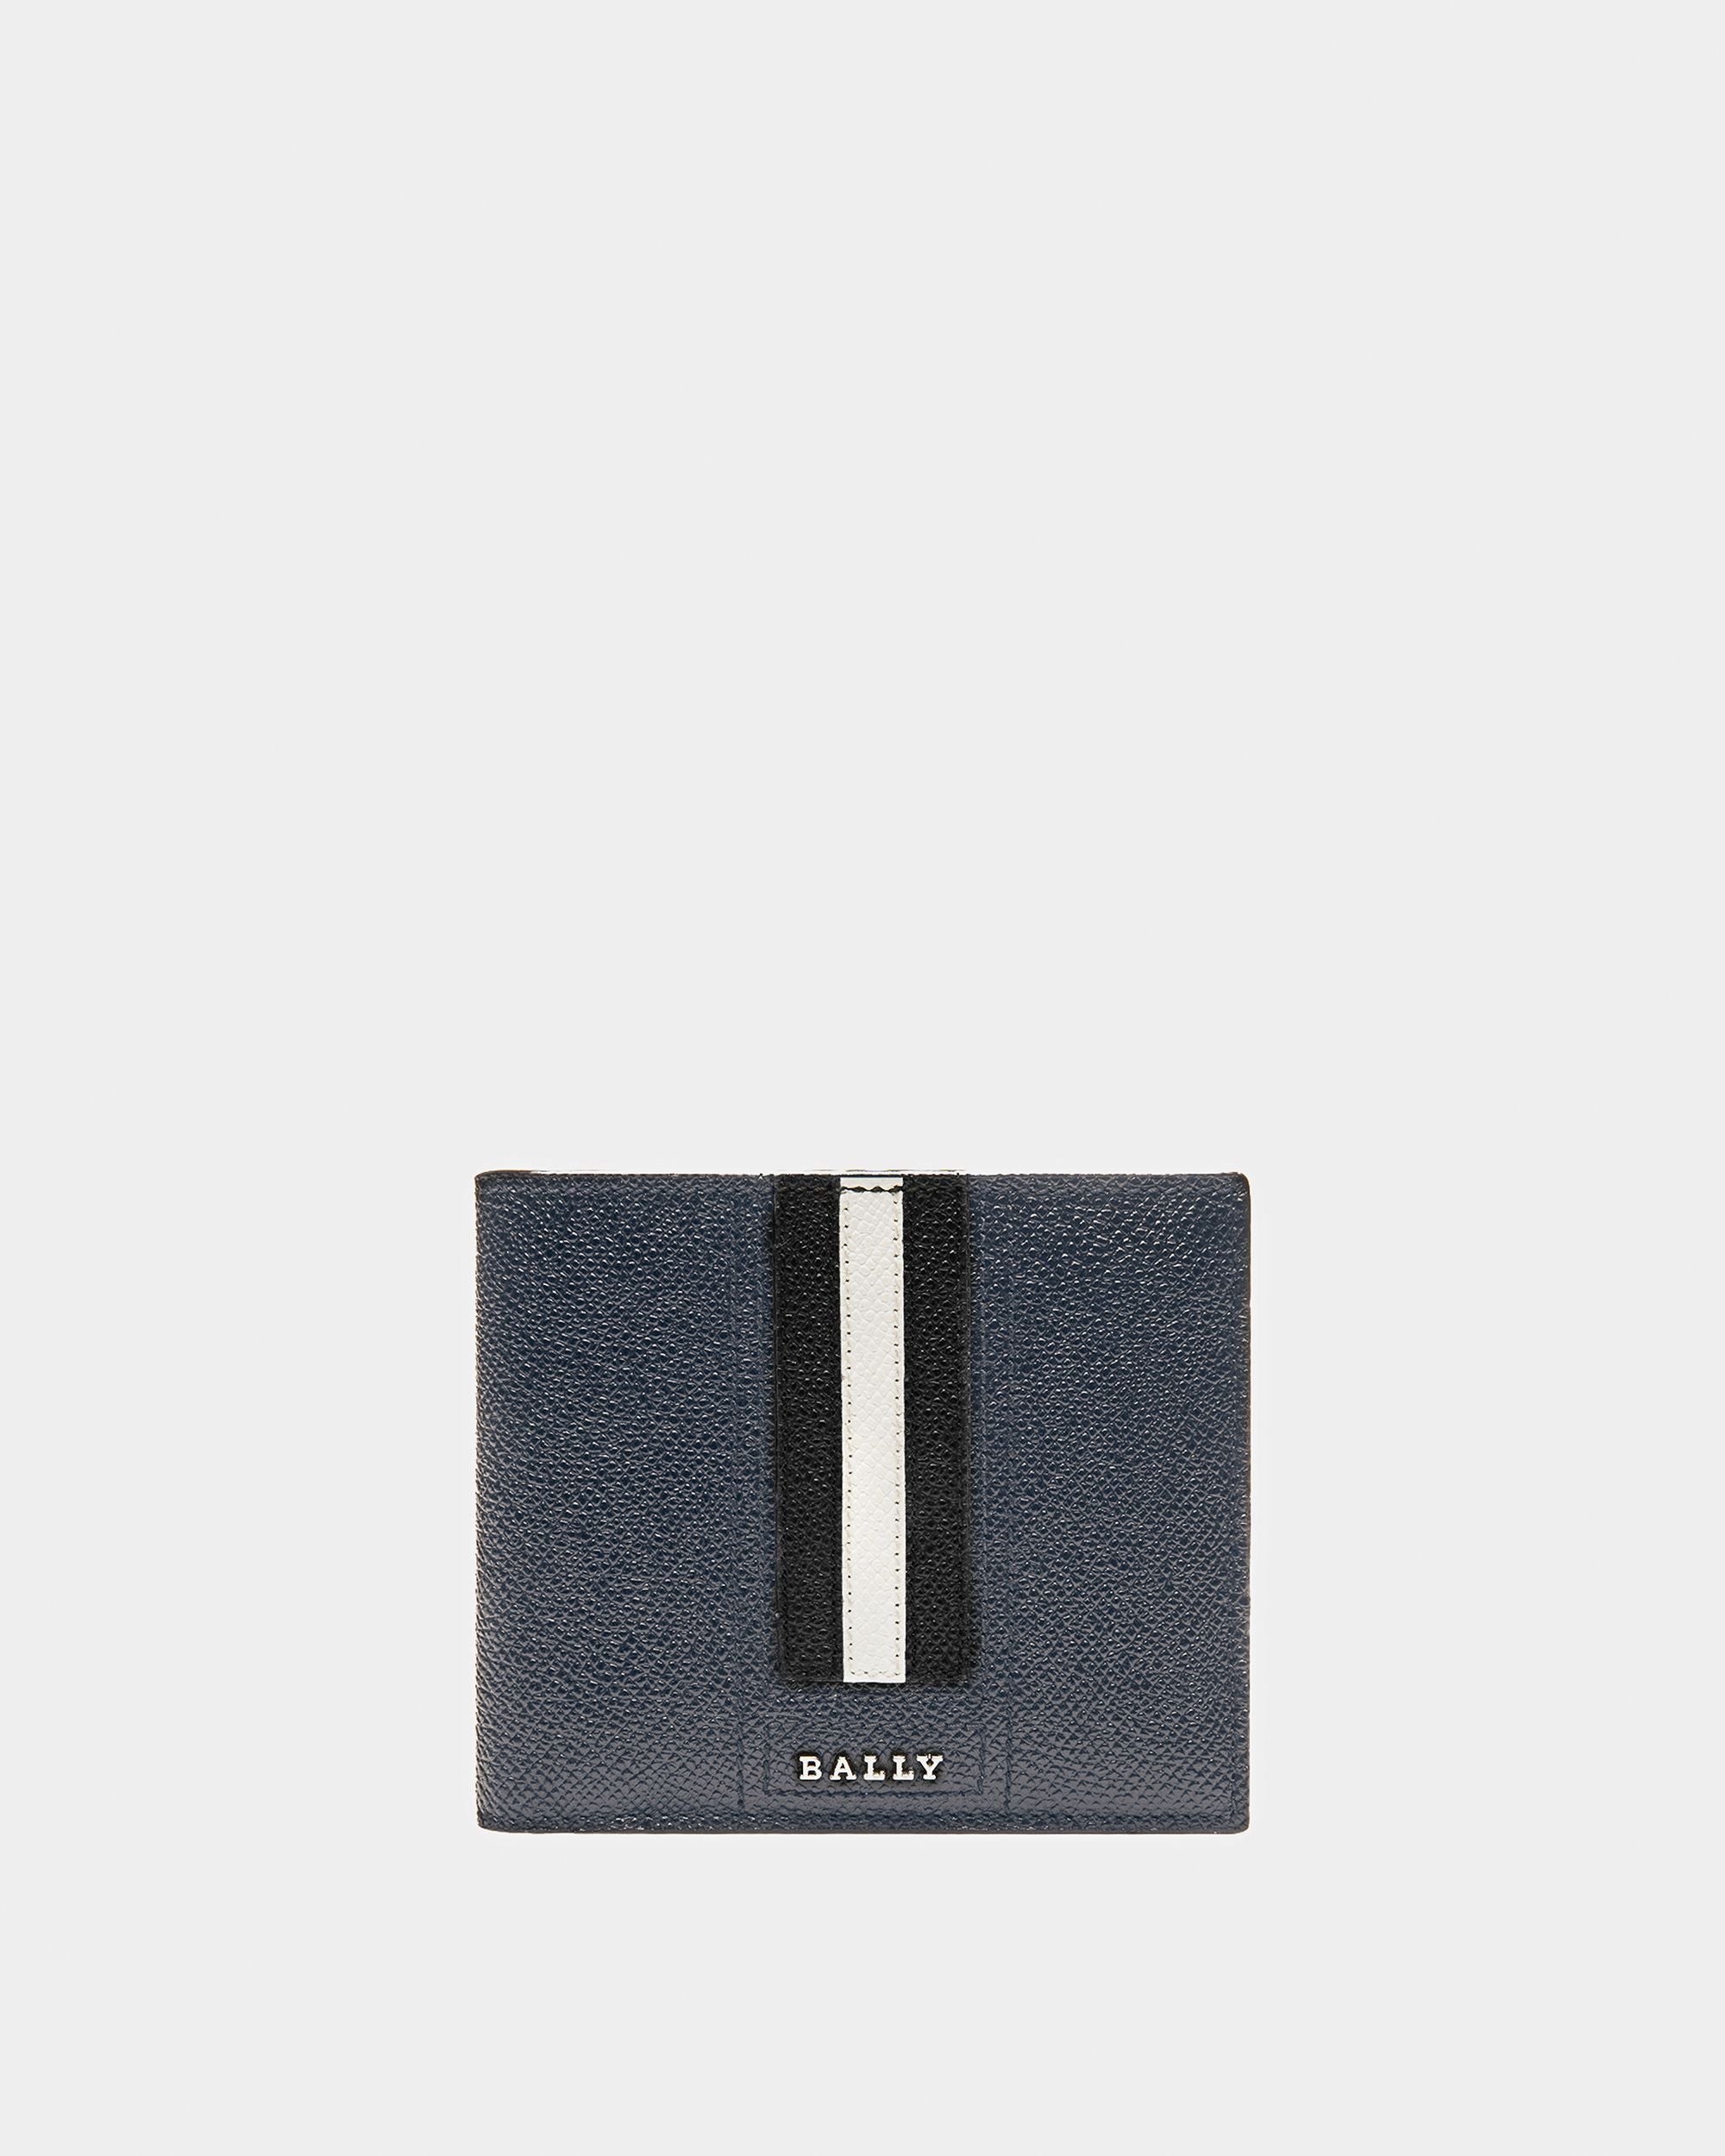 Taliky | Men's Coin Wallet | Blue Leather | Bally | Still Life Front